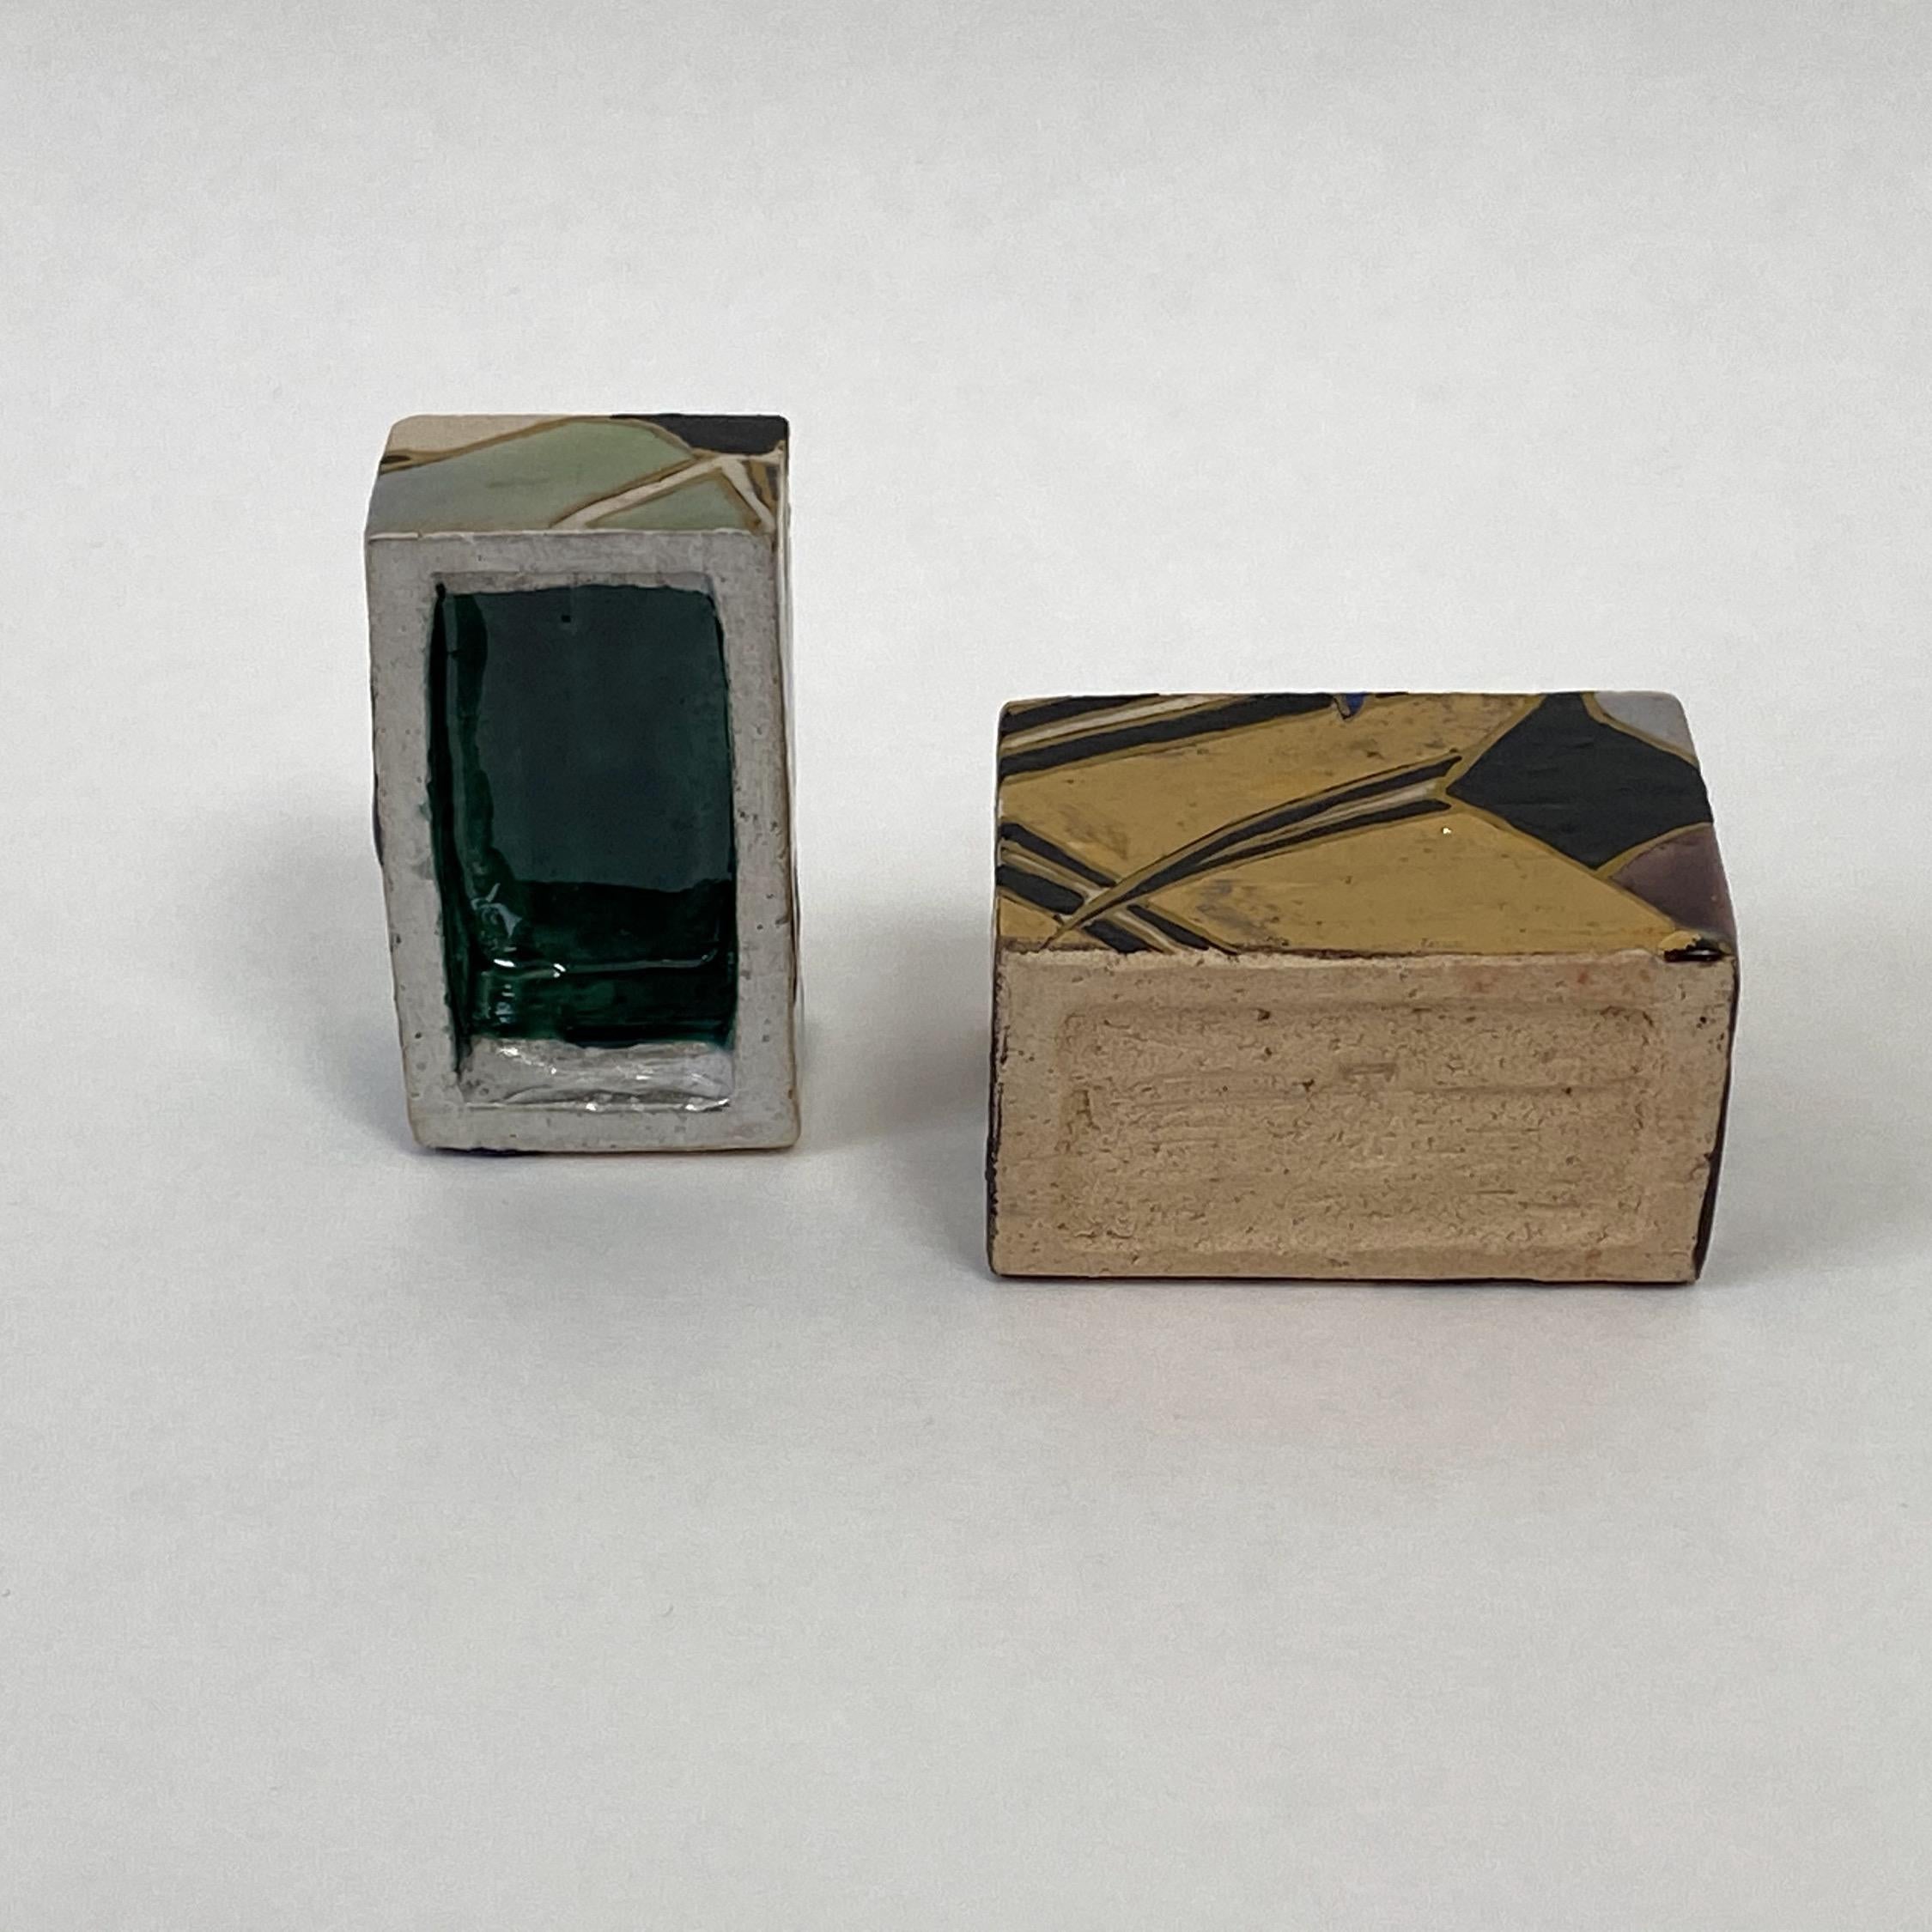 NAKAMURA TAKUO (b. 1945)
Green Box
Glazed stoneware with silver and gold
3 x 2.5 x 1.5 inches
With artist signed tomobako

Nakamura Takuo (b.1945), adventurously combines the traditional and the modern in his work. His ceramic art is inspired by the